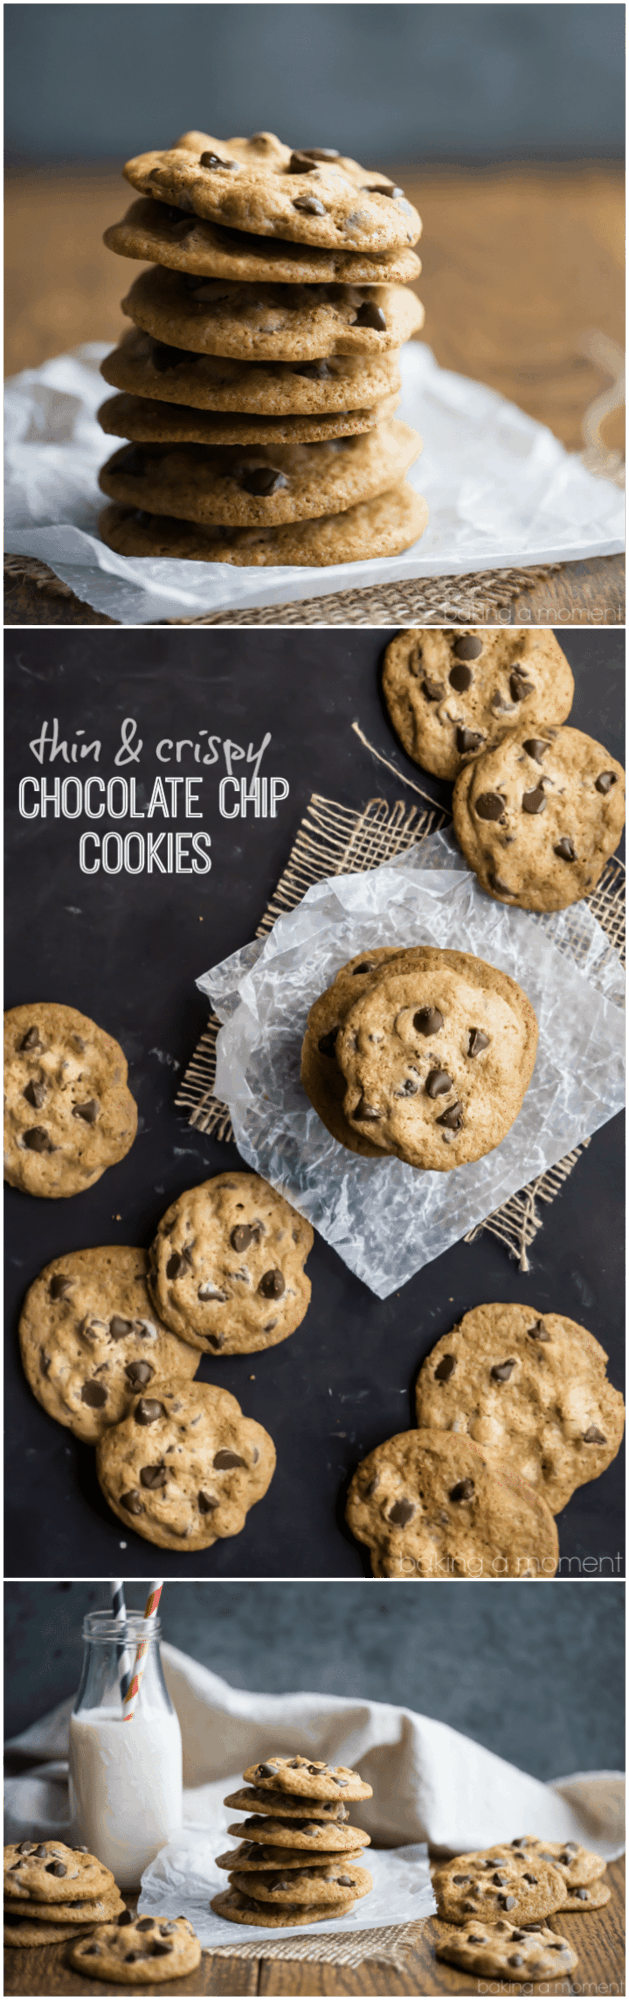 My husband loves these cookies! Just like Tate's- super thin and crisp, with a buttery flavor and pockets of melty chocolate running all throughout. 